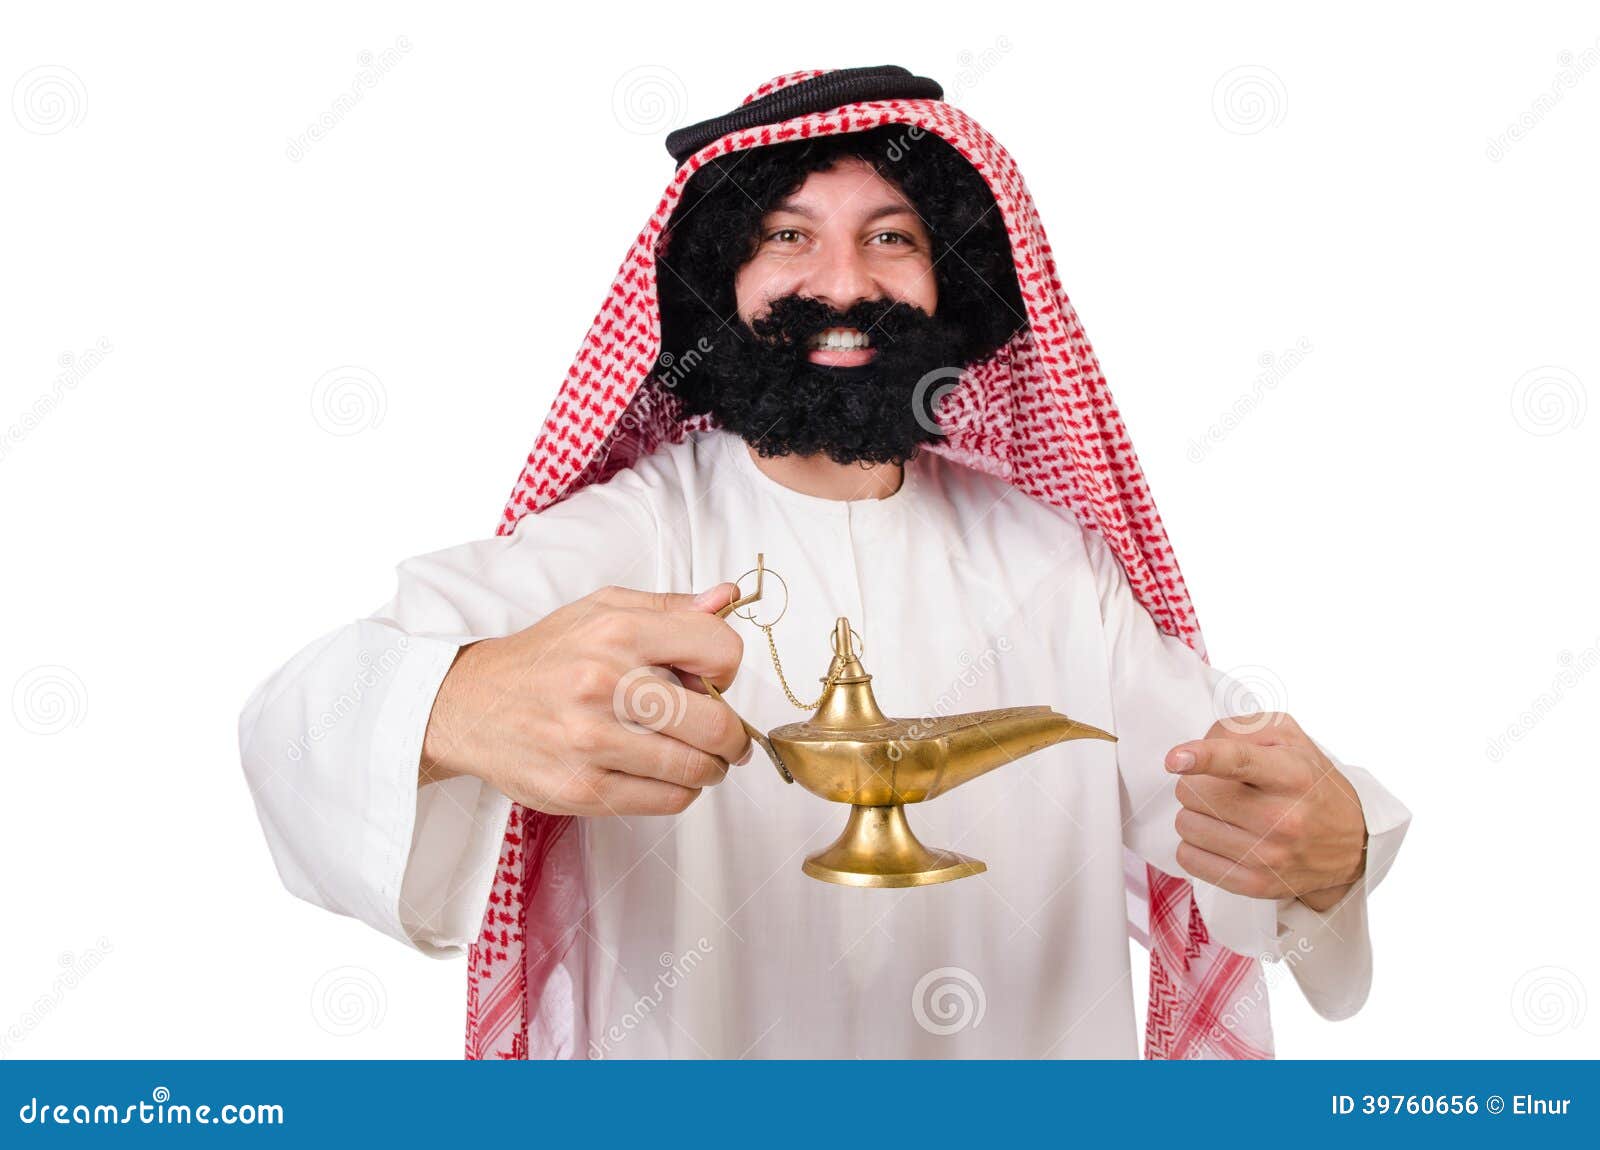 Funny Arab Man With Lamp Stock Photo - Image: 39760656